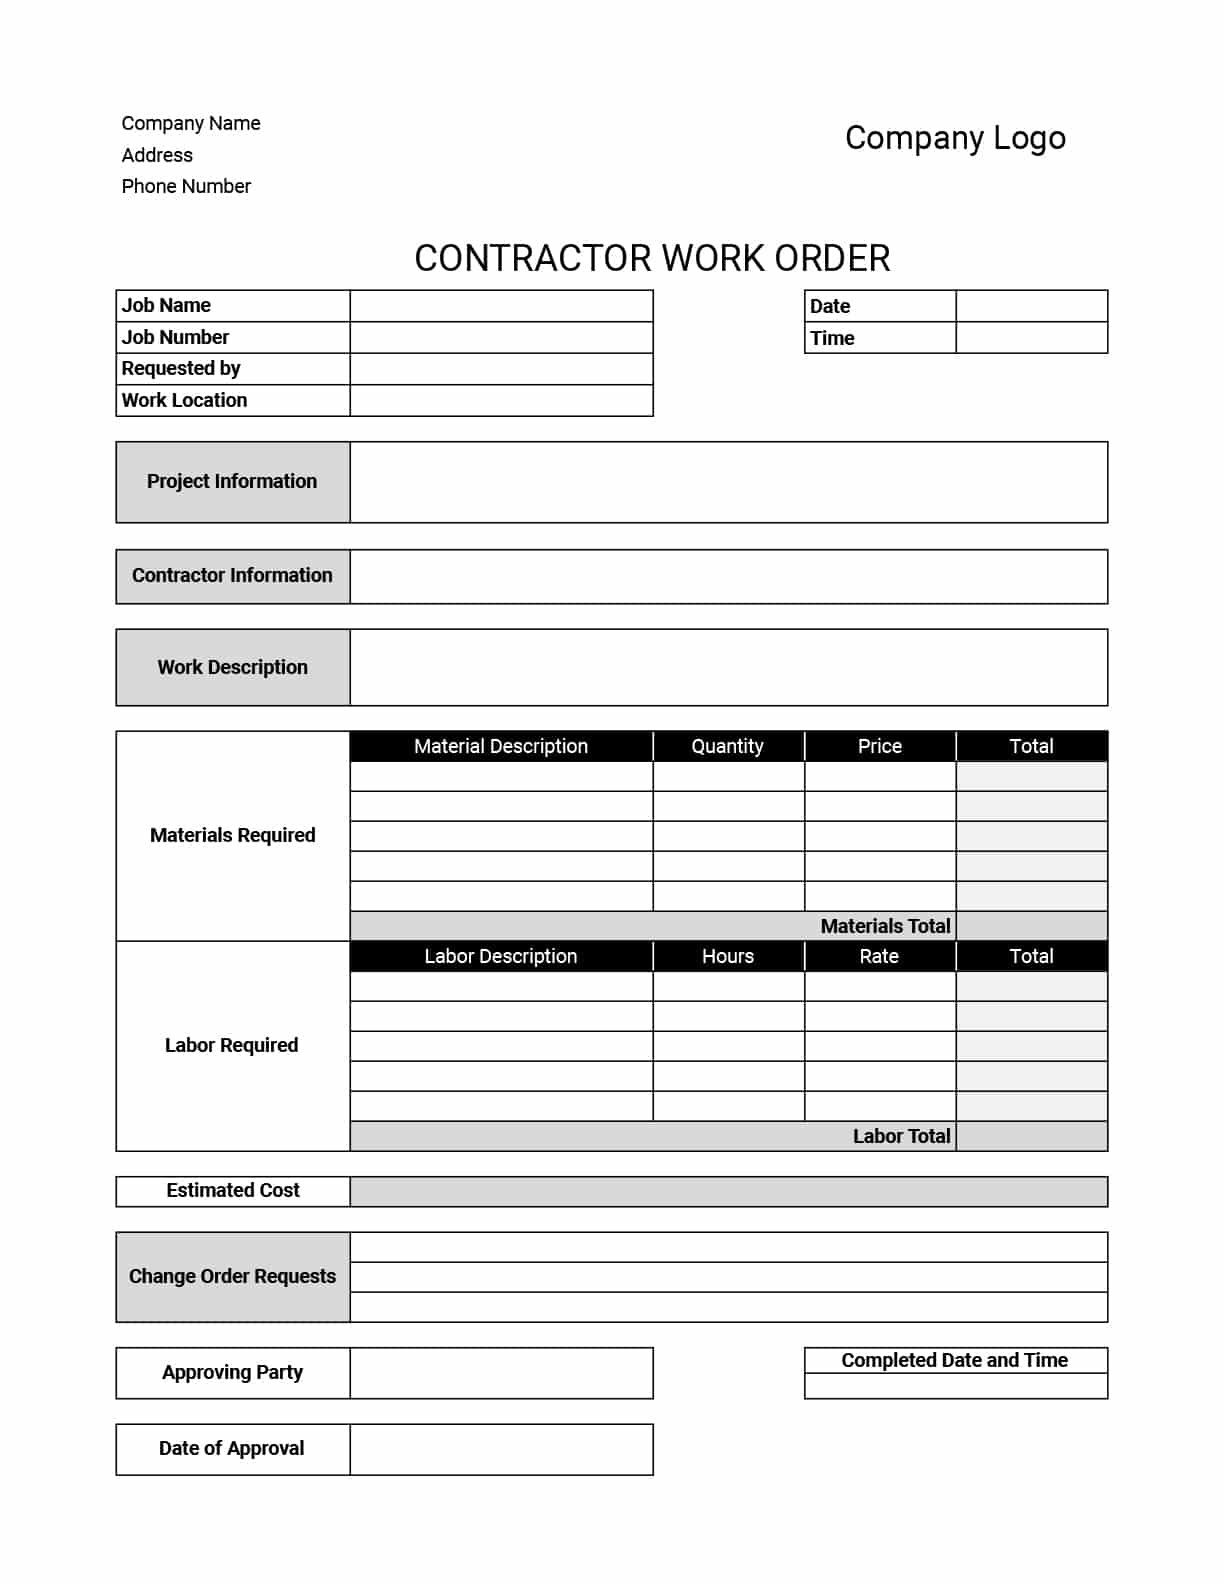 work-order-templates-download-print-for-free